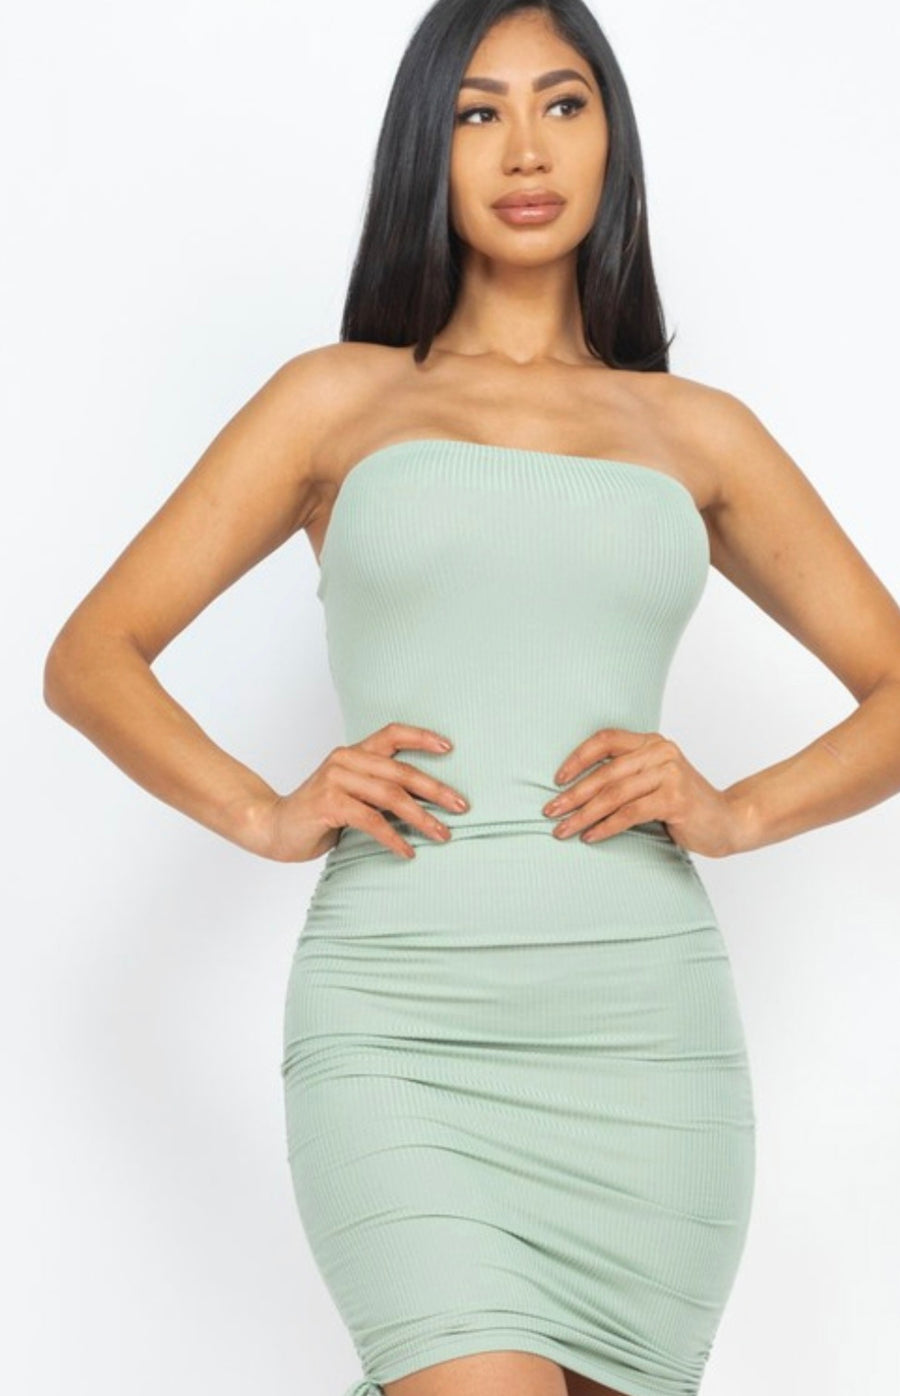 Just chillin ruched bodycon dress